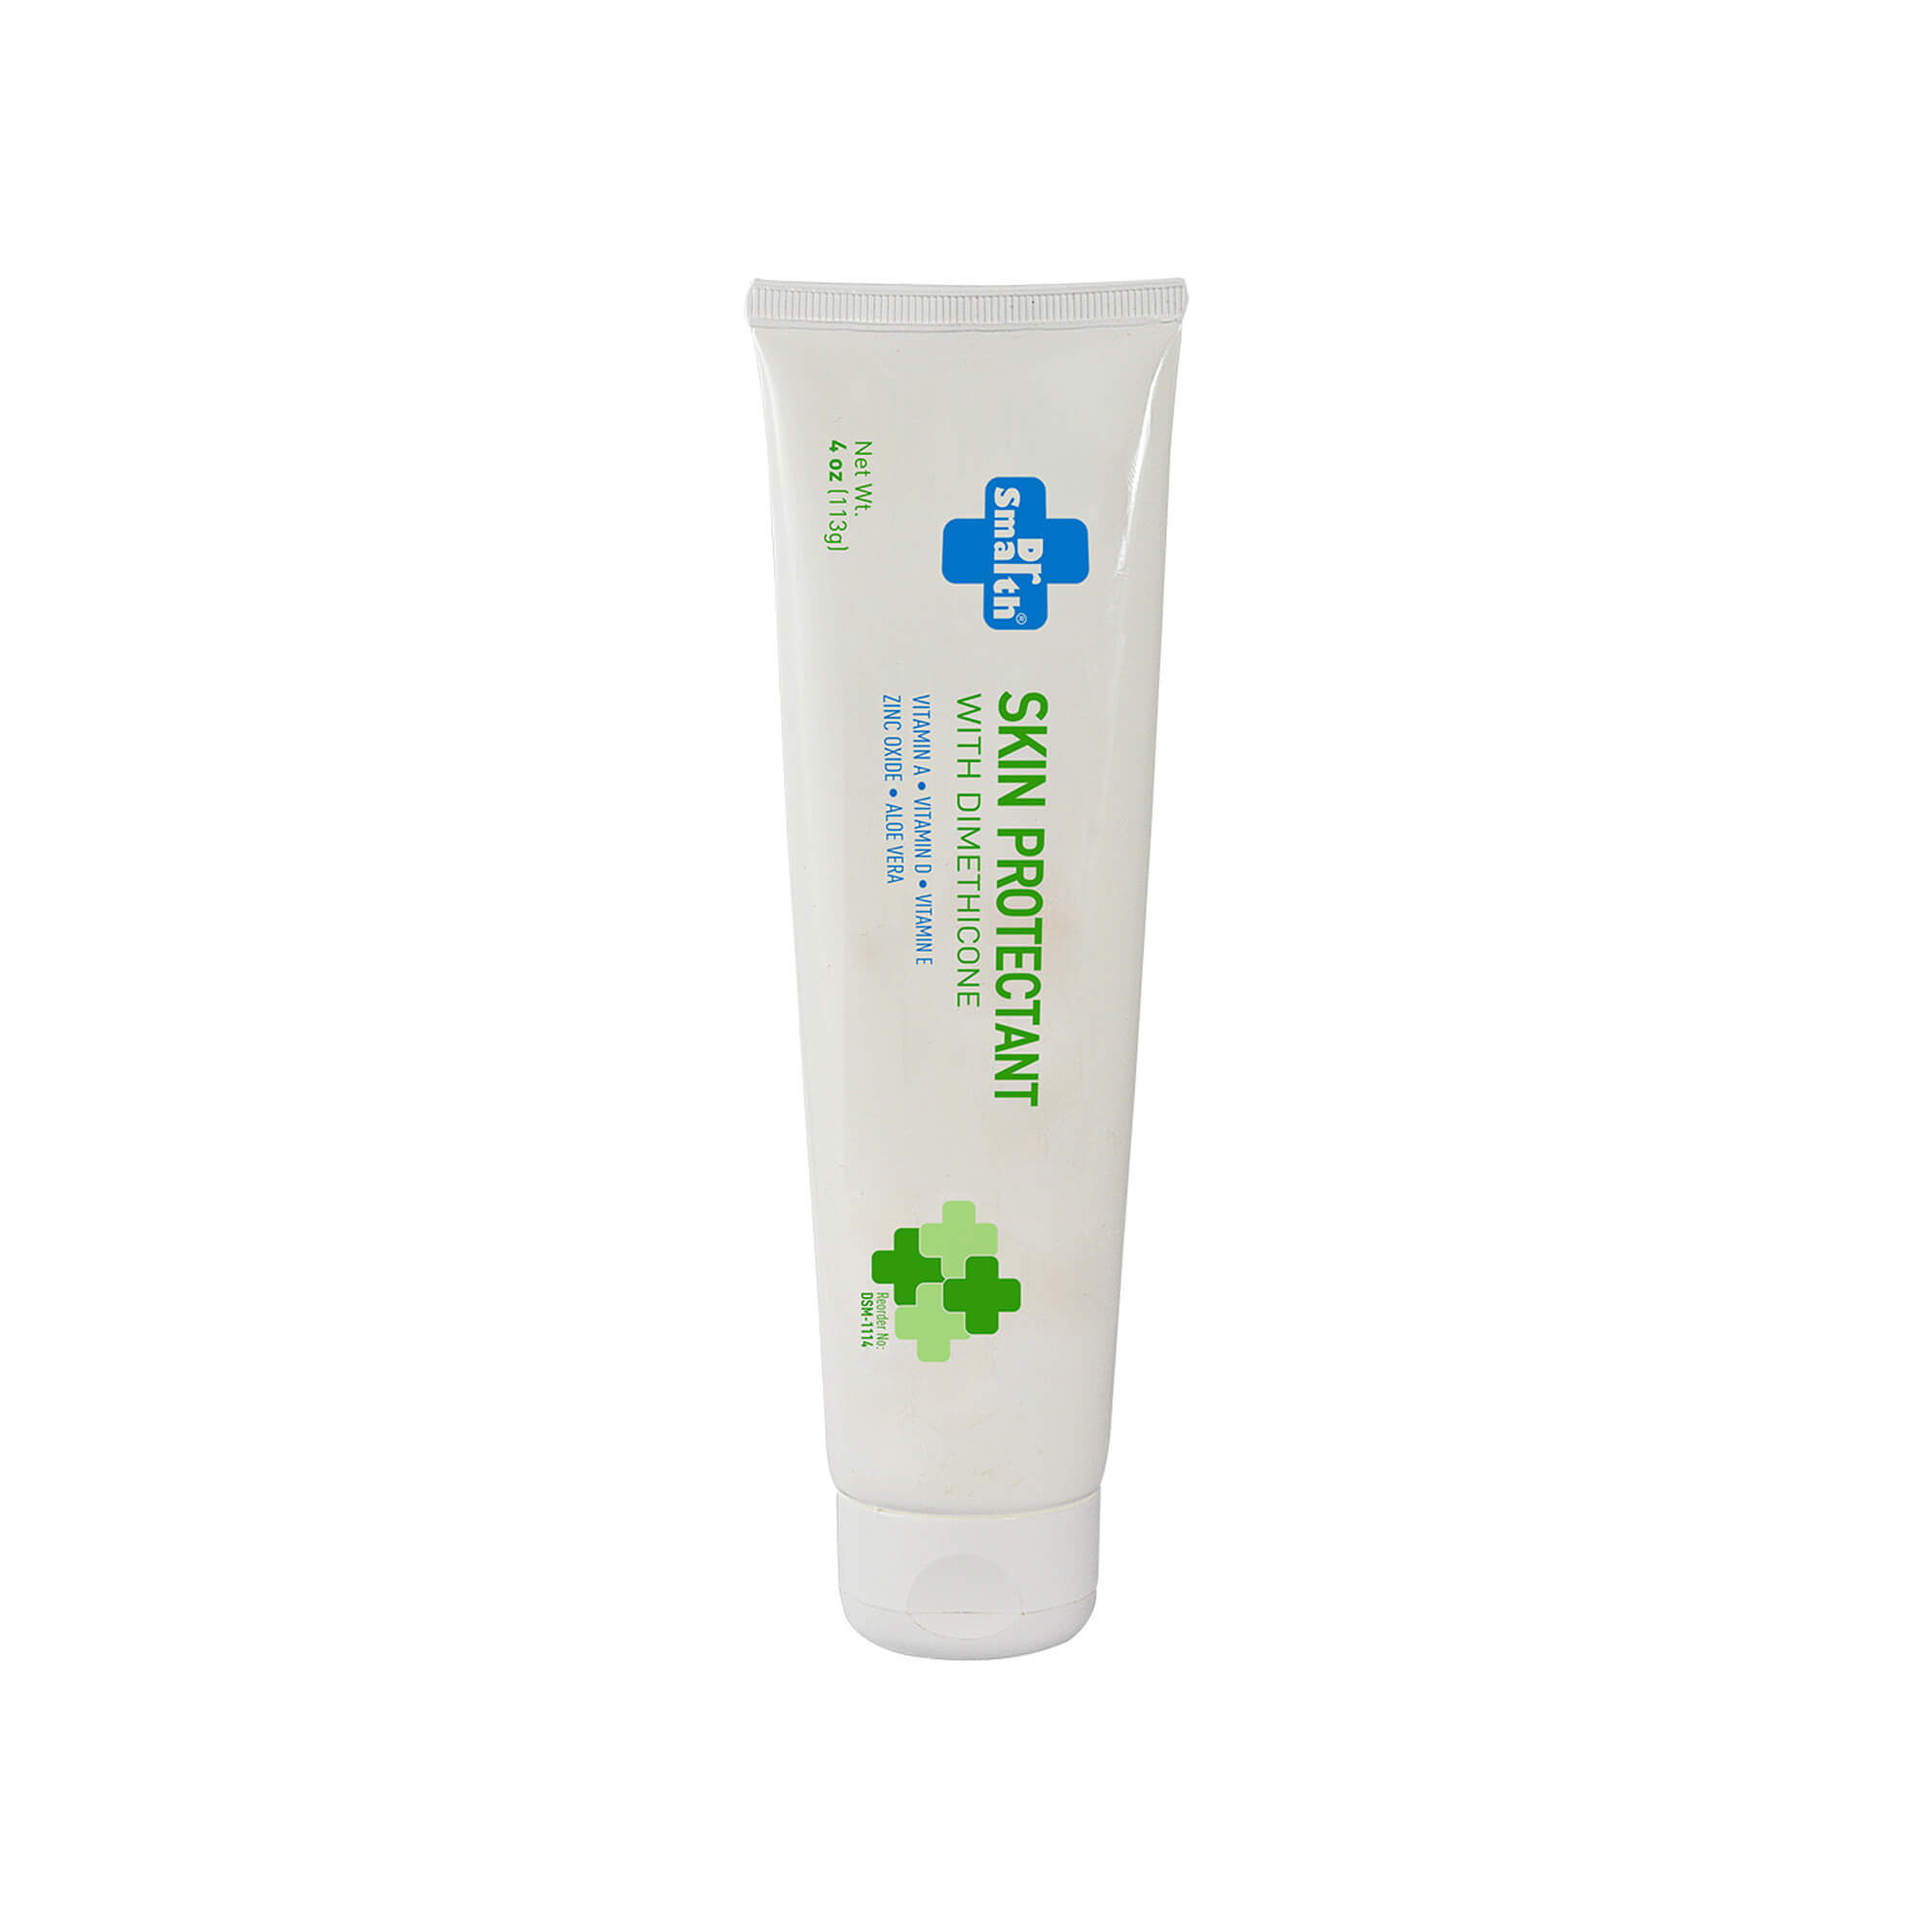 Skin Protectant with Dimethicone